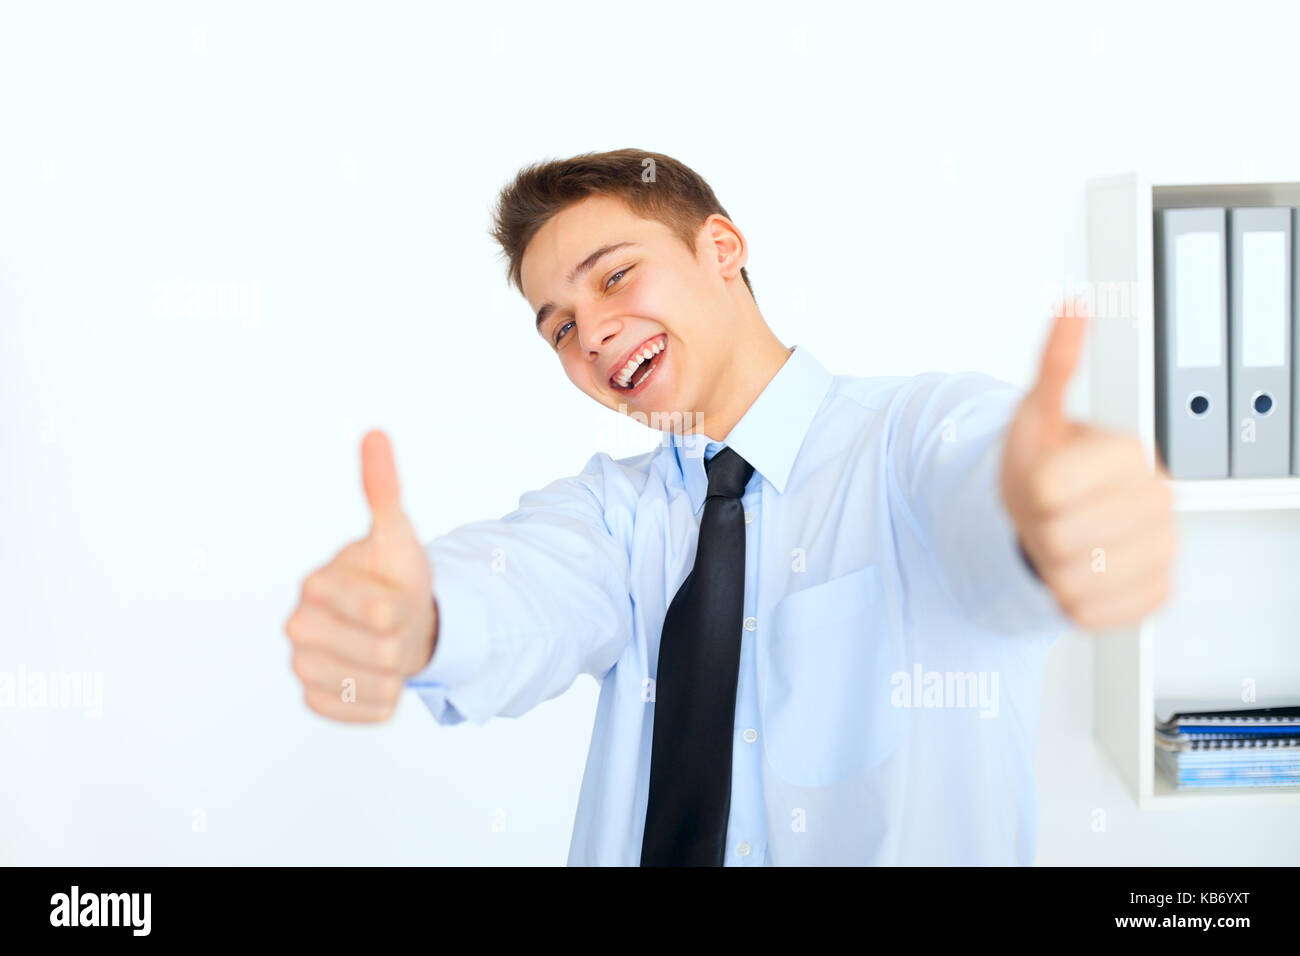 Portrait of young laughing woman showing Thumbs up in office Banque D'Images